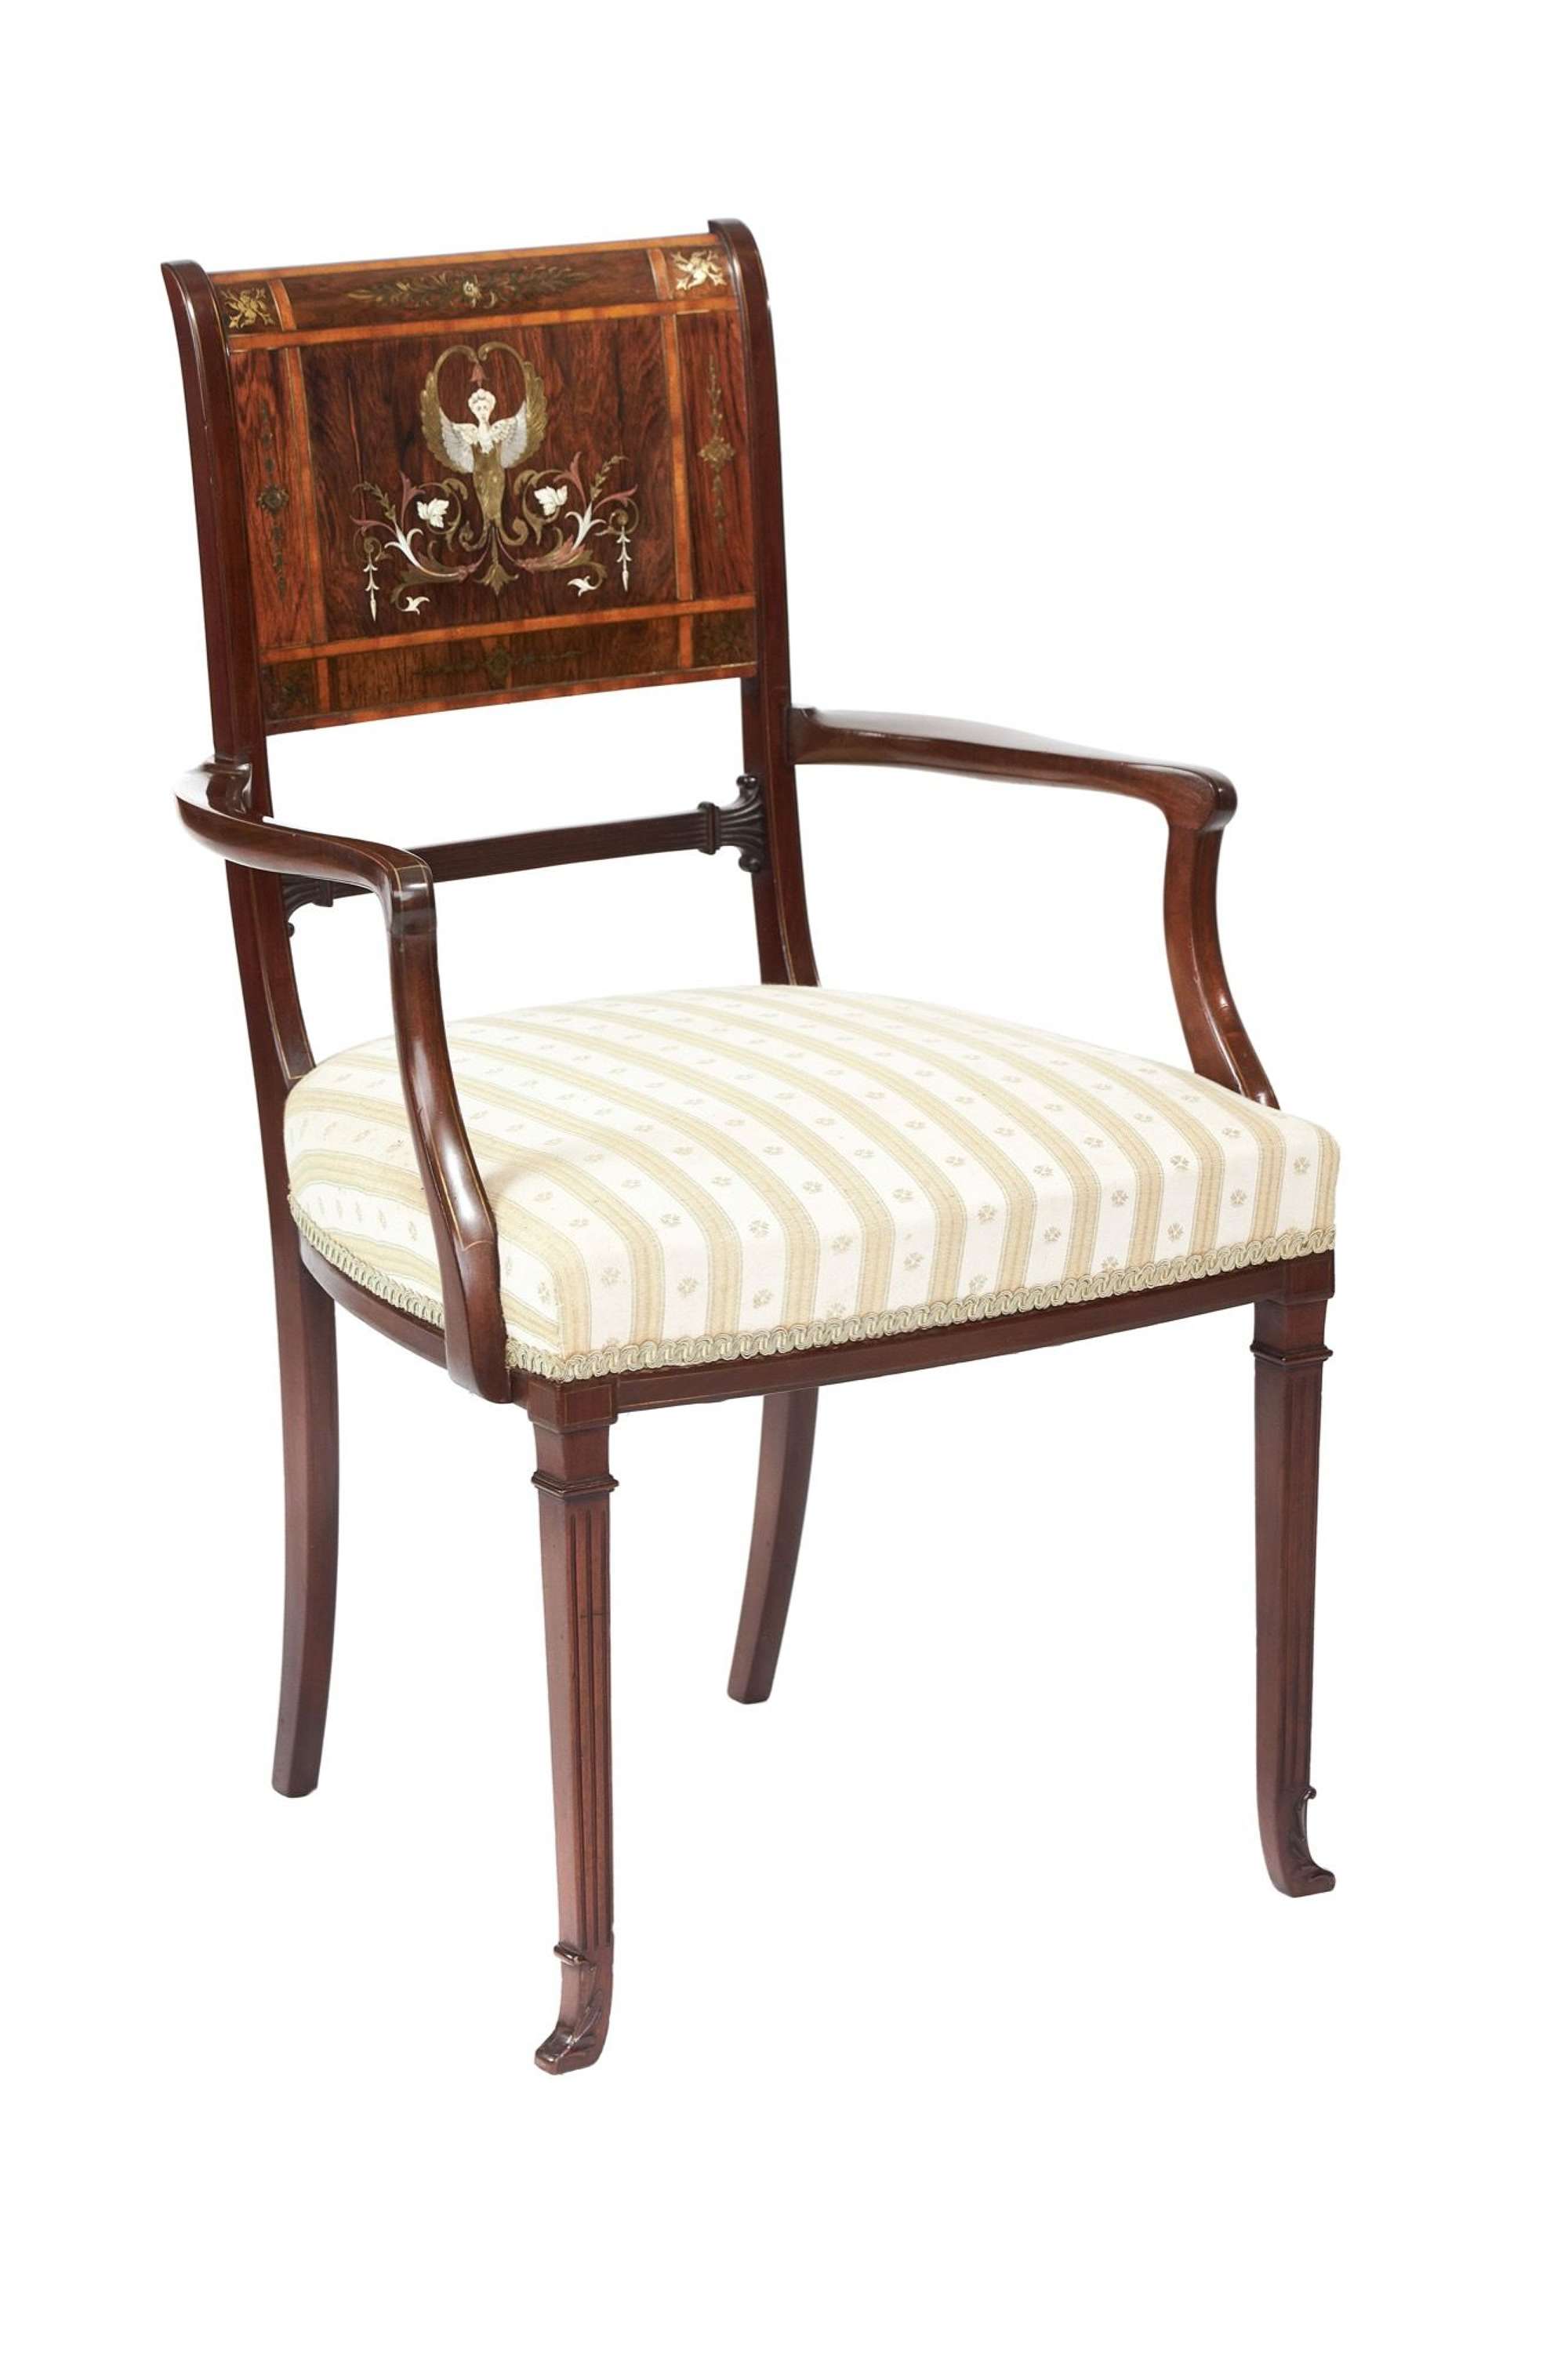 Exhibition quality Fine brass inlaid Rosewood elbow chair